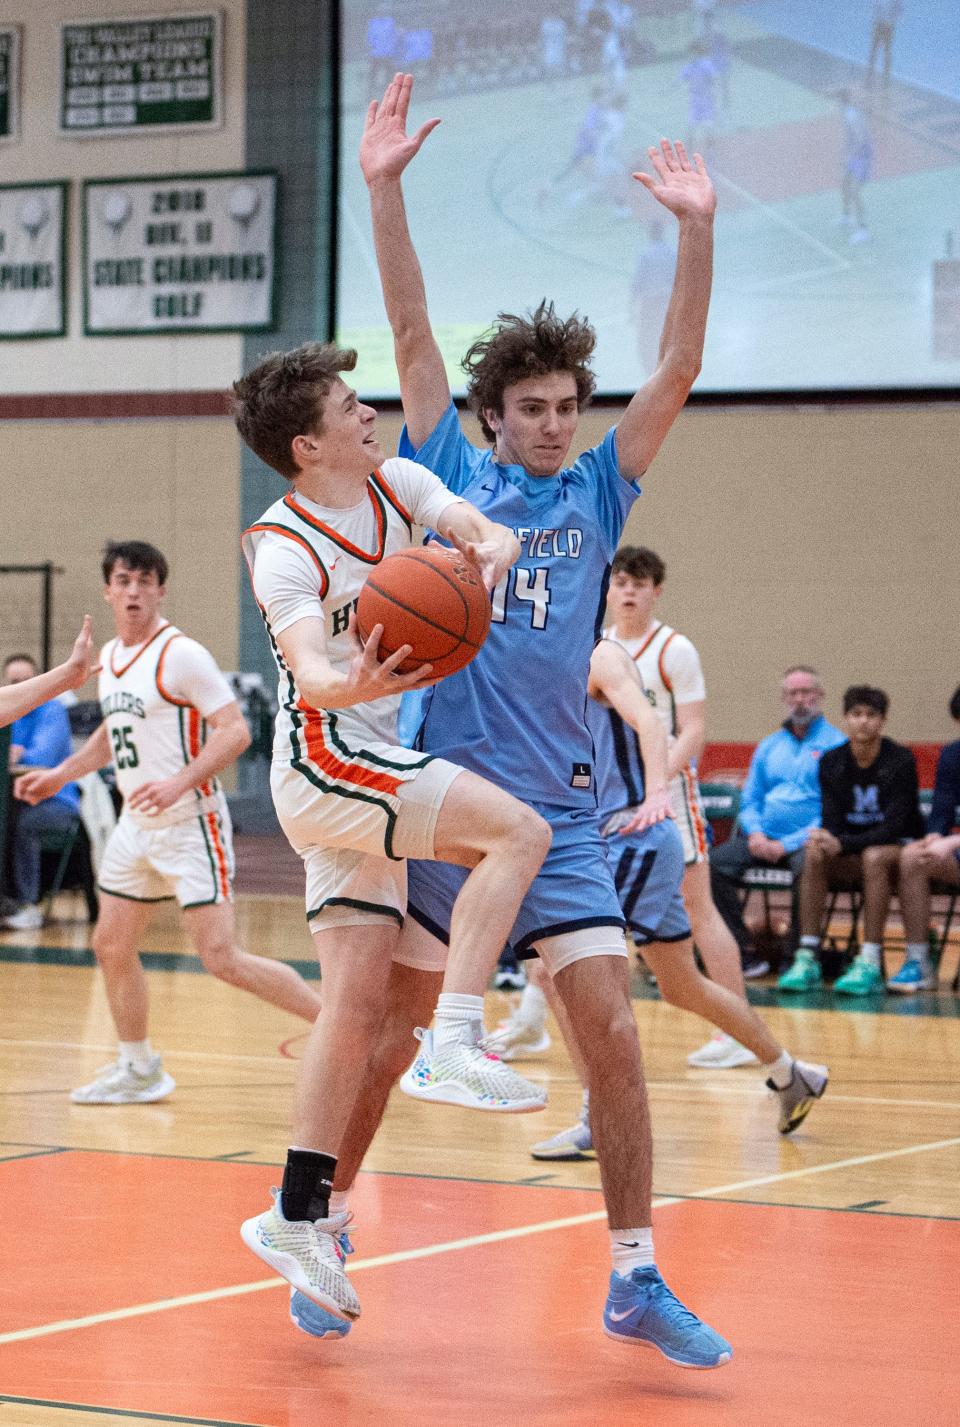 Hopkinton senior captain Jack Ianelli goes in for a layup around Medfield senior Jack Iovino during the game in Hopkinton, Feb. 6, 2024. The Hillers beat the Big Blue, 79-57.